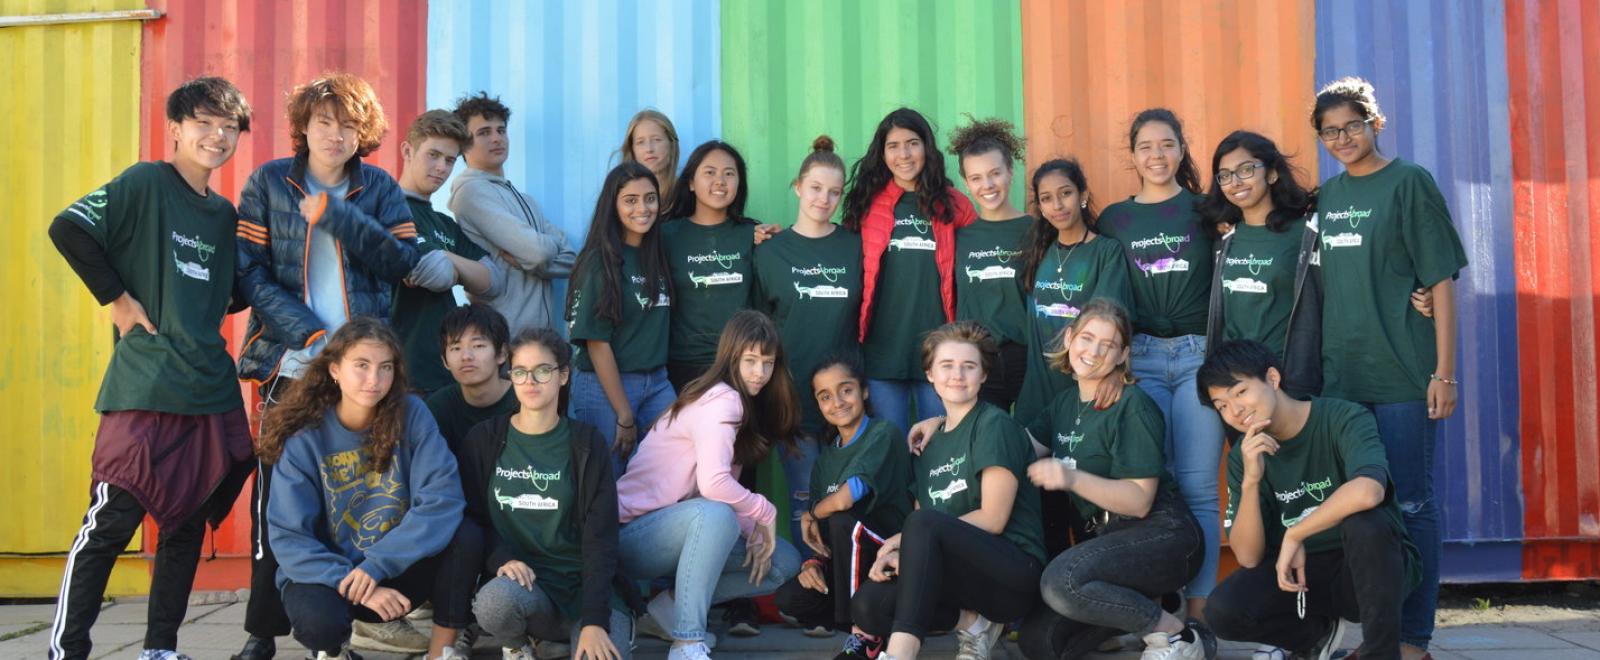 A group of teenagers from the same school on a group volunteer trip to South Africa.